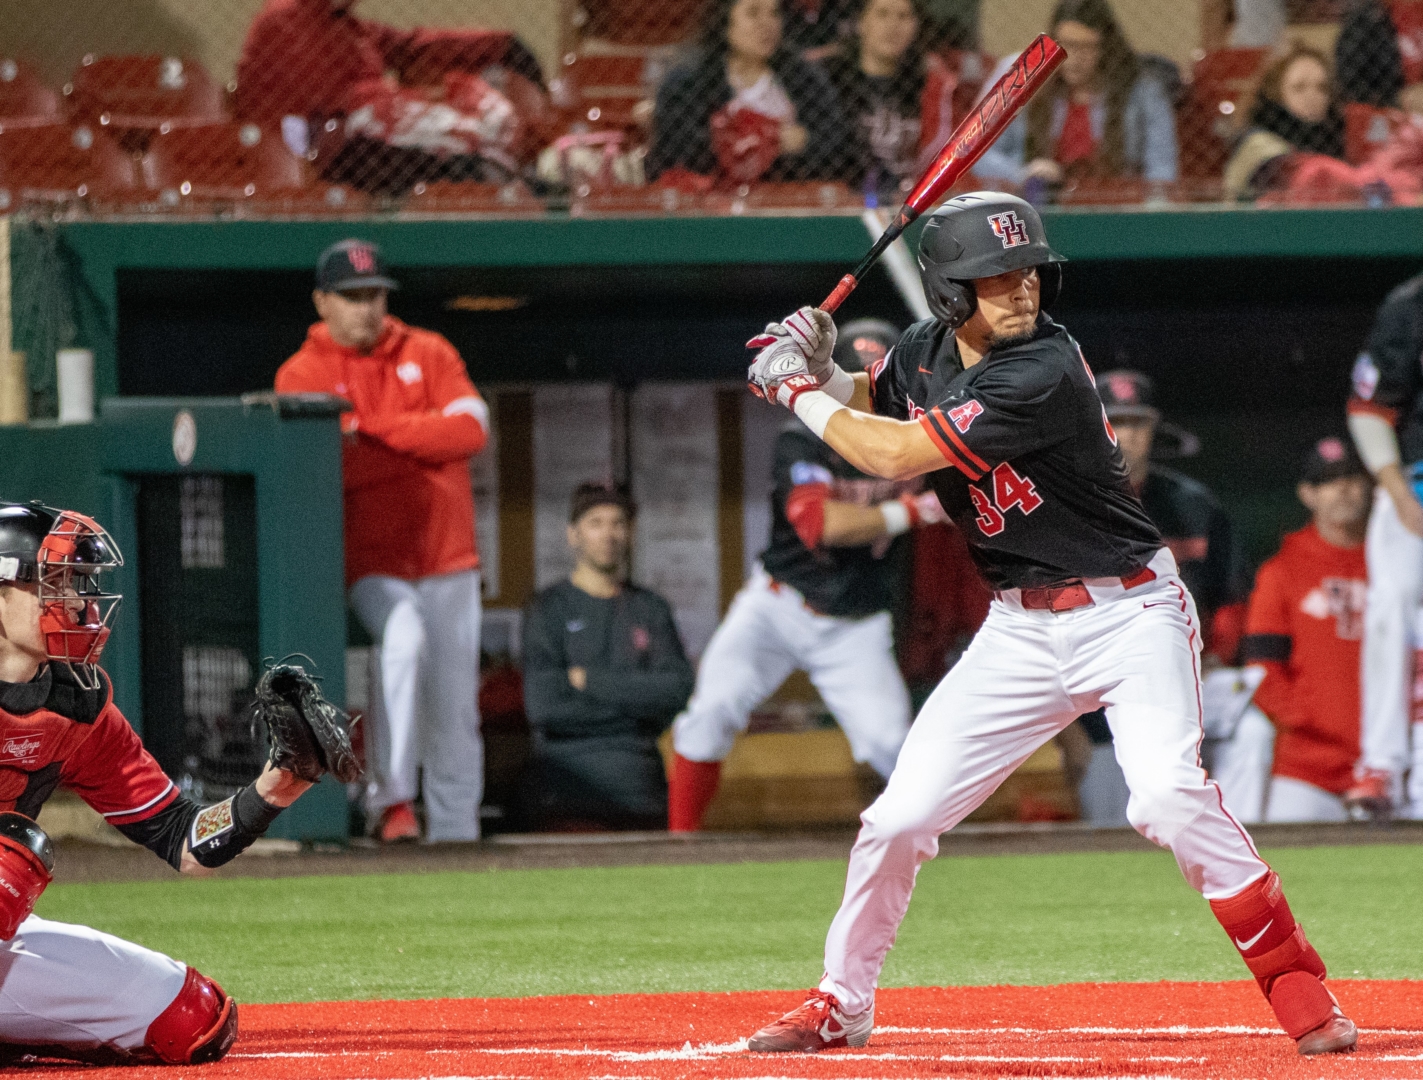 Catcher Kyle Lovelace at bat during his junior season for UH baseball in the 2020 season. | Jhair Romero/The Cougar